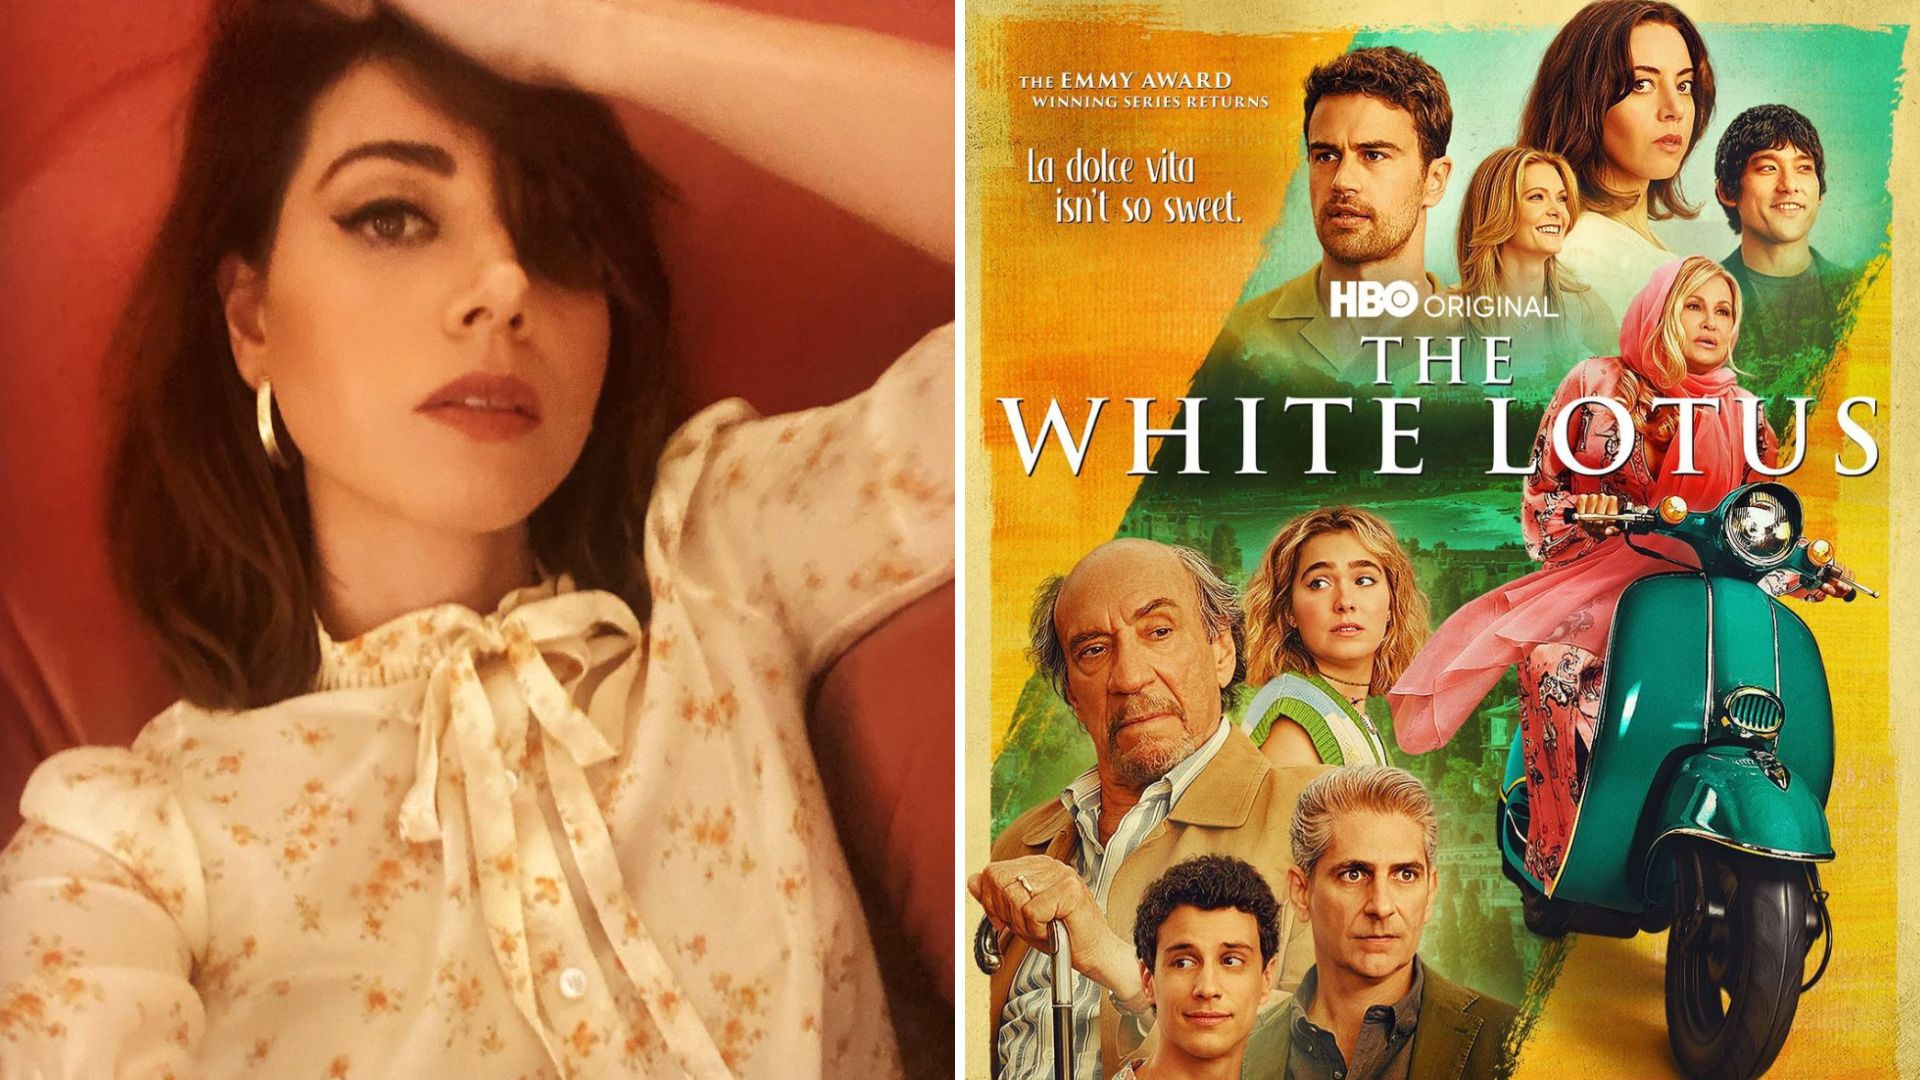 After All the Buzz Left From ‘The White Lotus,’ Let’s Take a Closer Look at Aubrey Plaza belatina latine